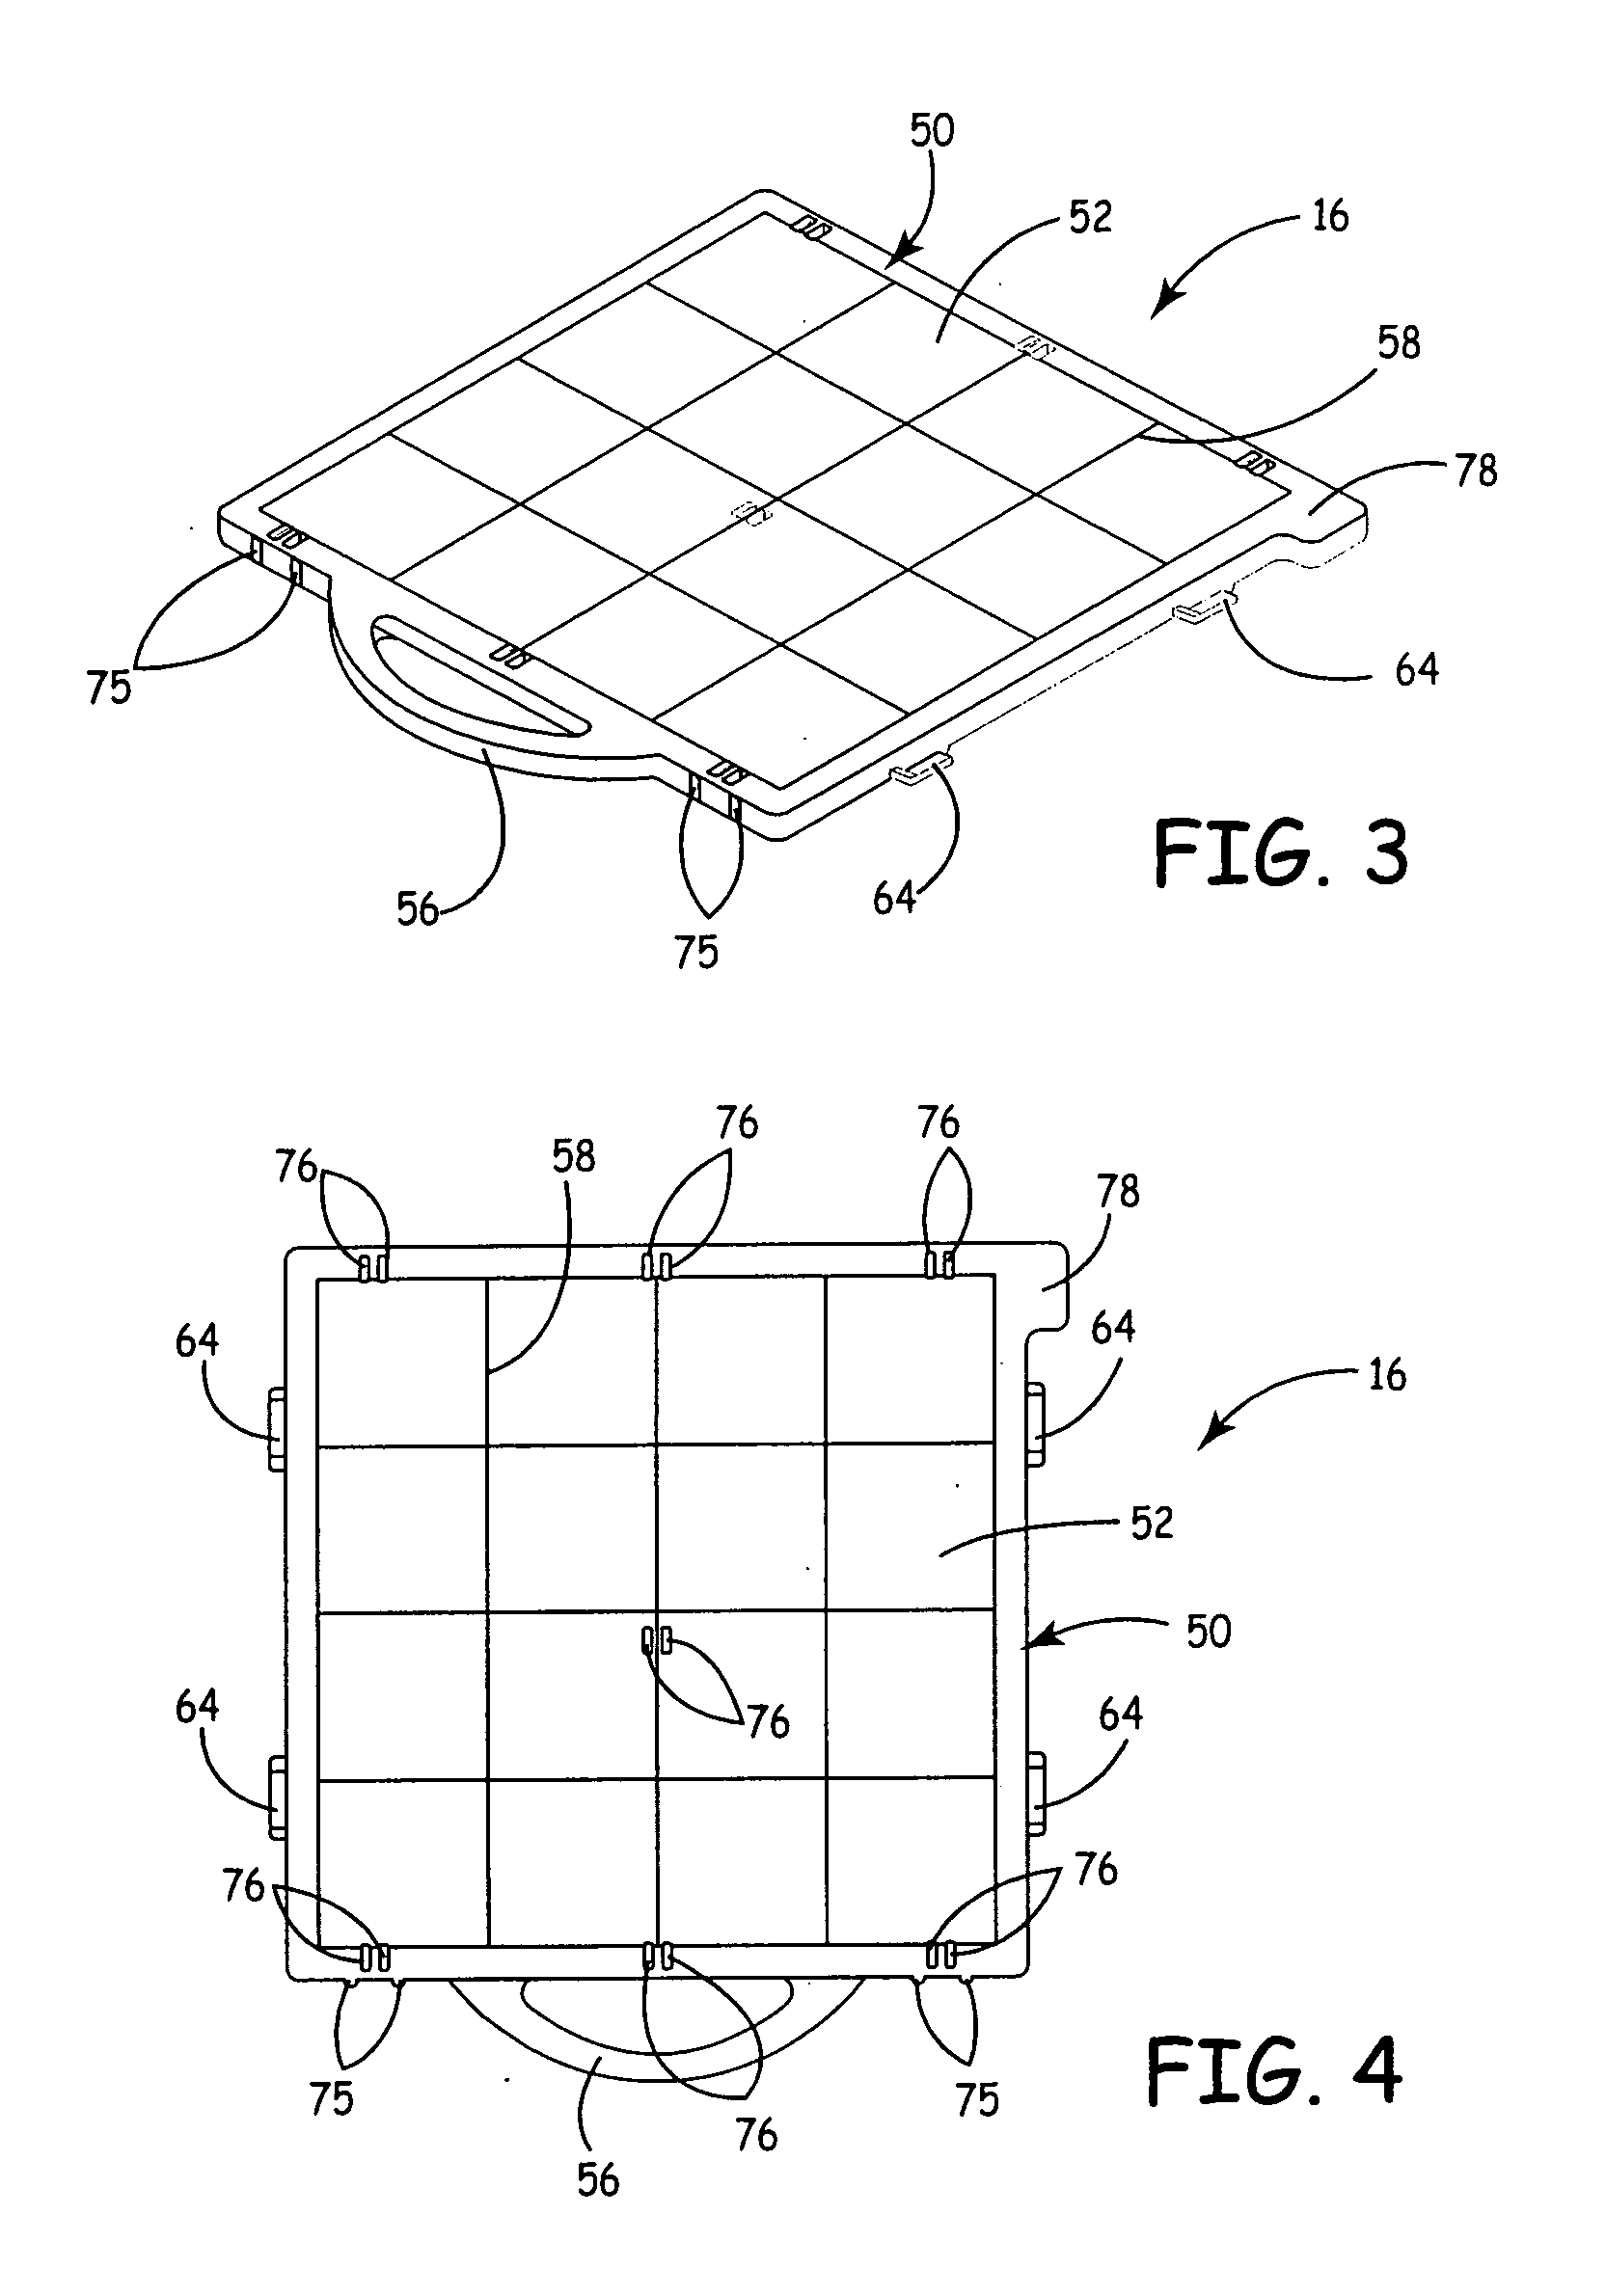 Modeling apparatus with tray substrate